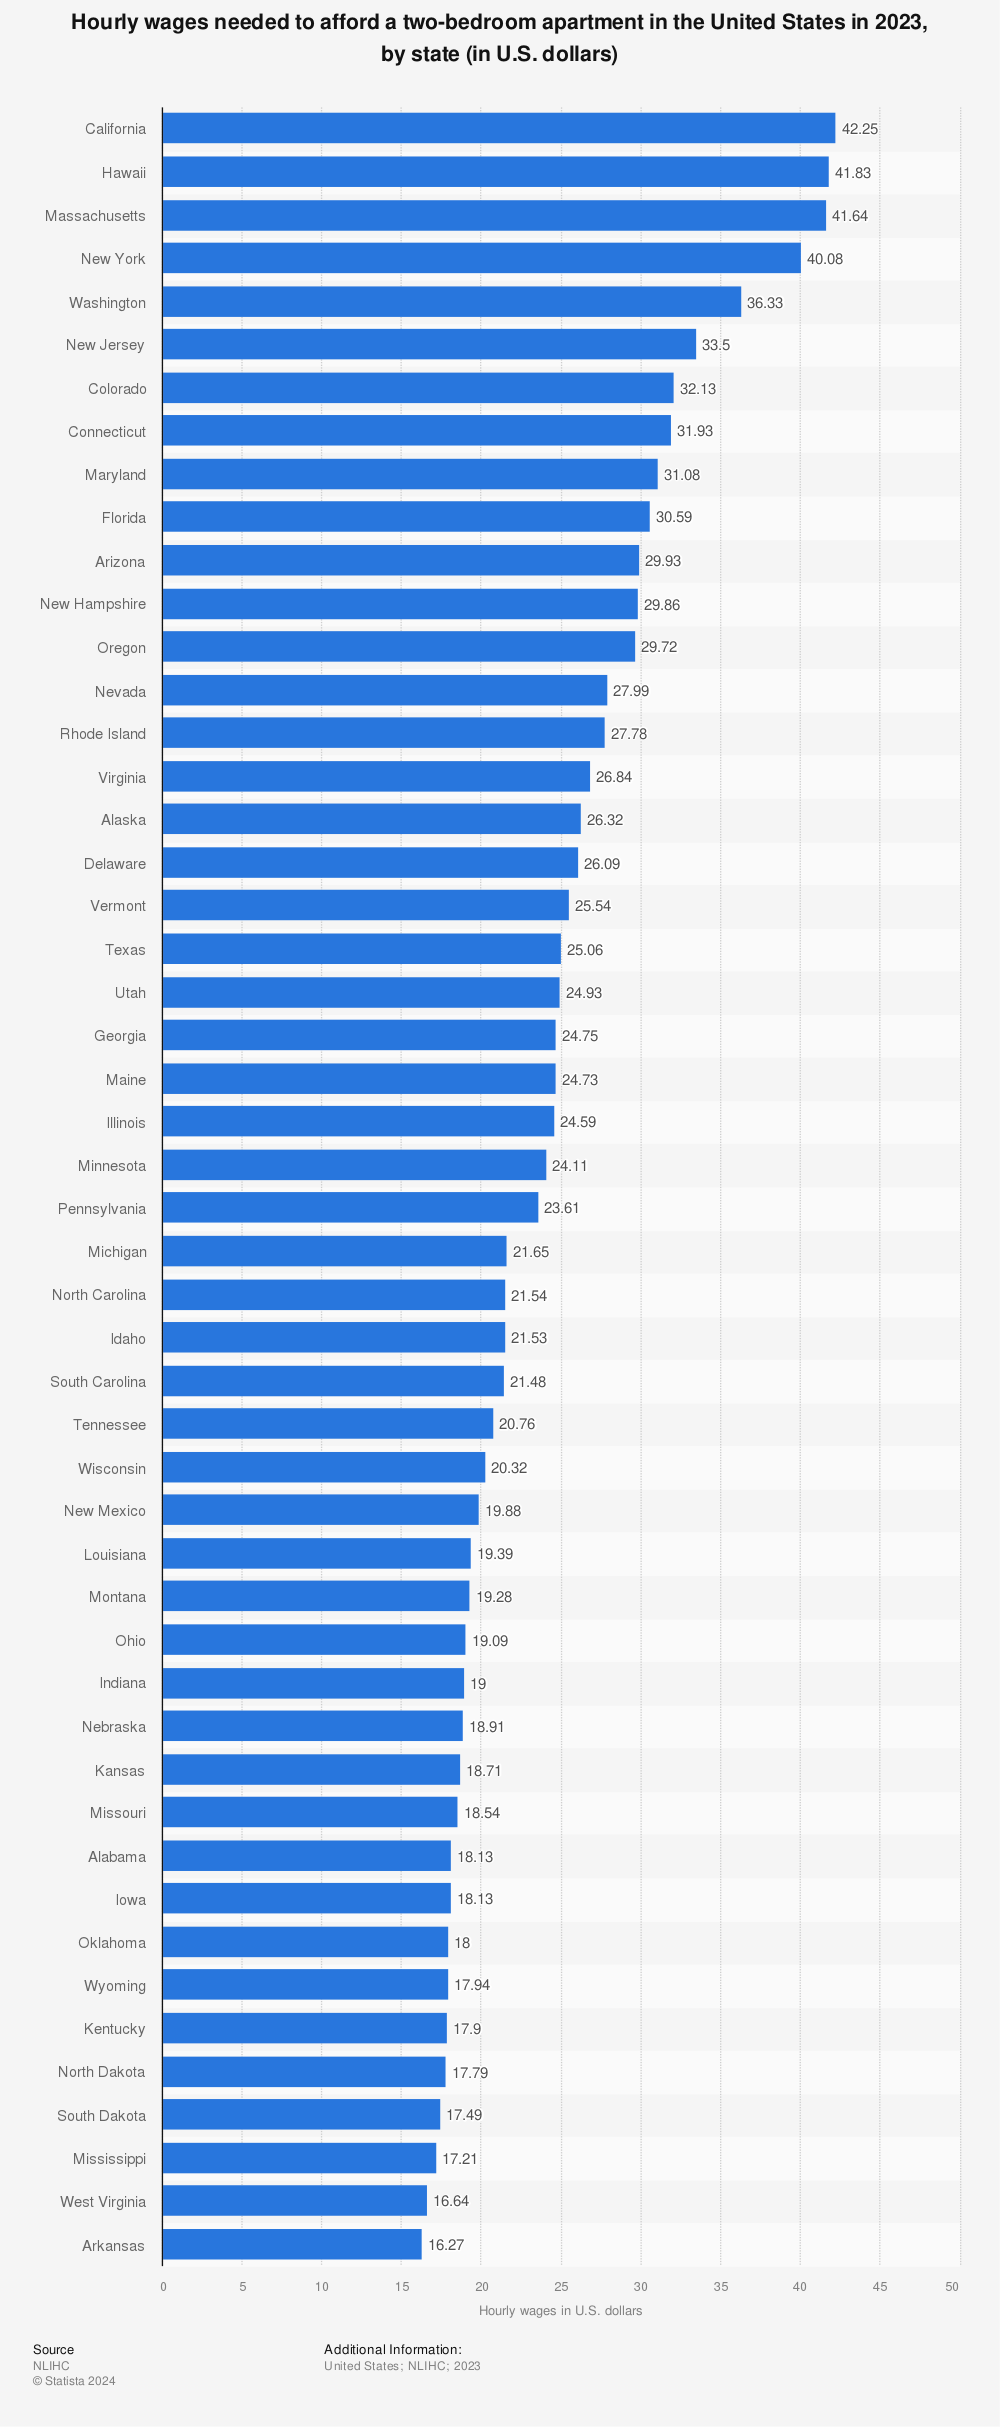 Statistic: Hourly wages needed to afford a two-bedroom apartment in the United States in 2023, by state (in U.S. dollars) | Statista